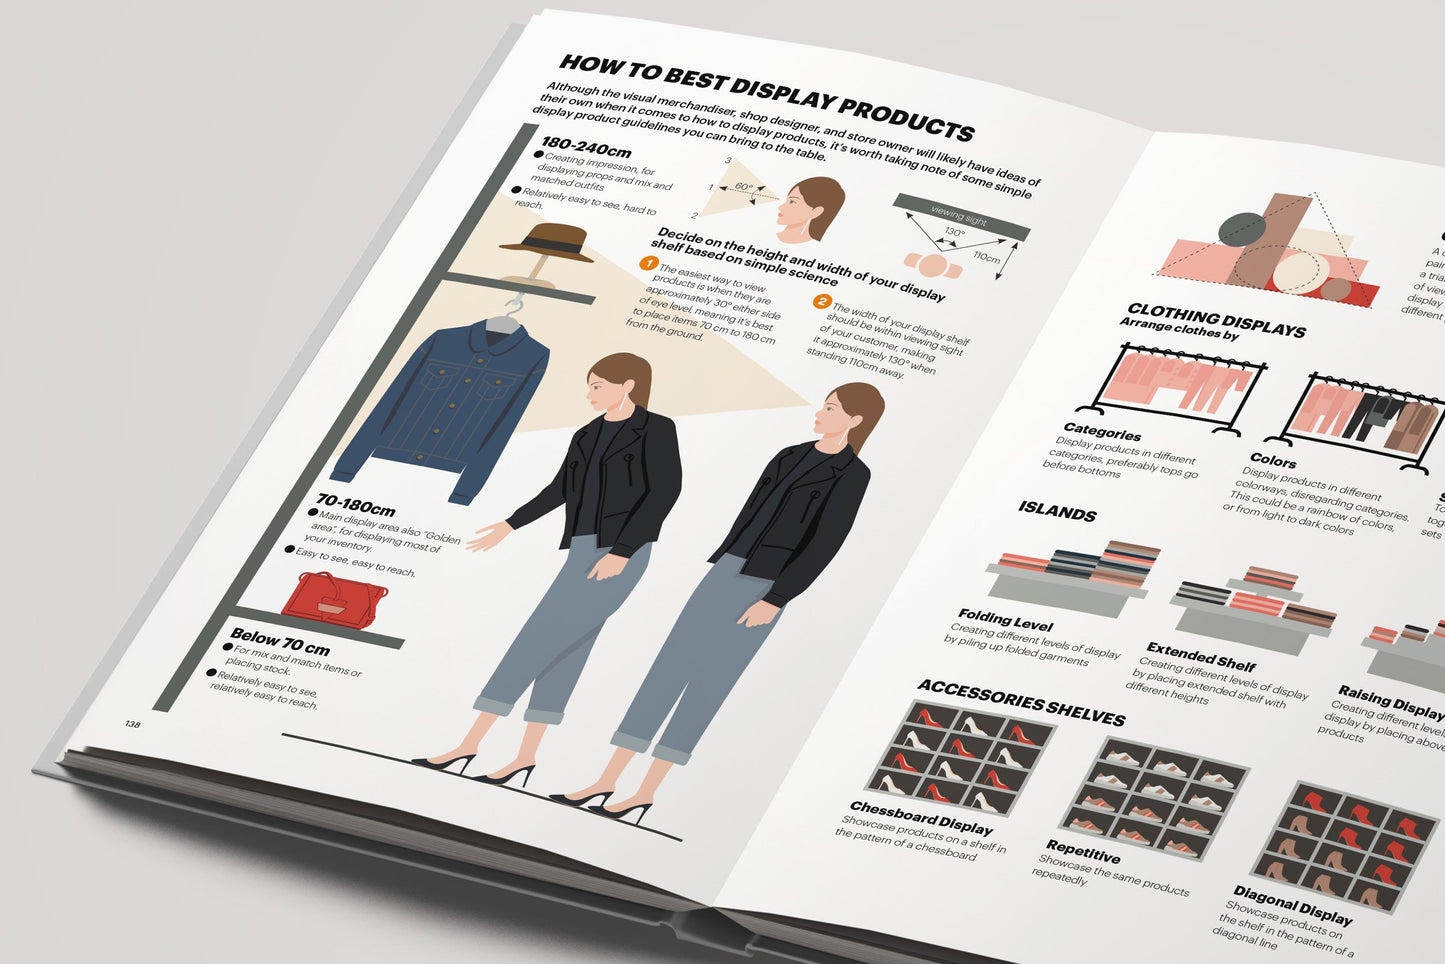 The Fashion Business Manual: An Illustrated Guide to Building a Fashion Brand